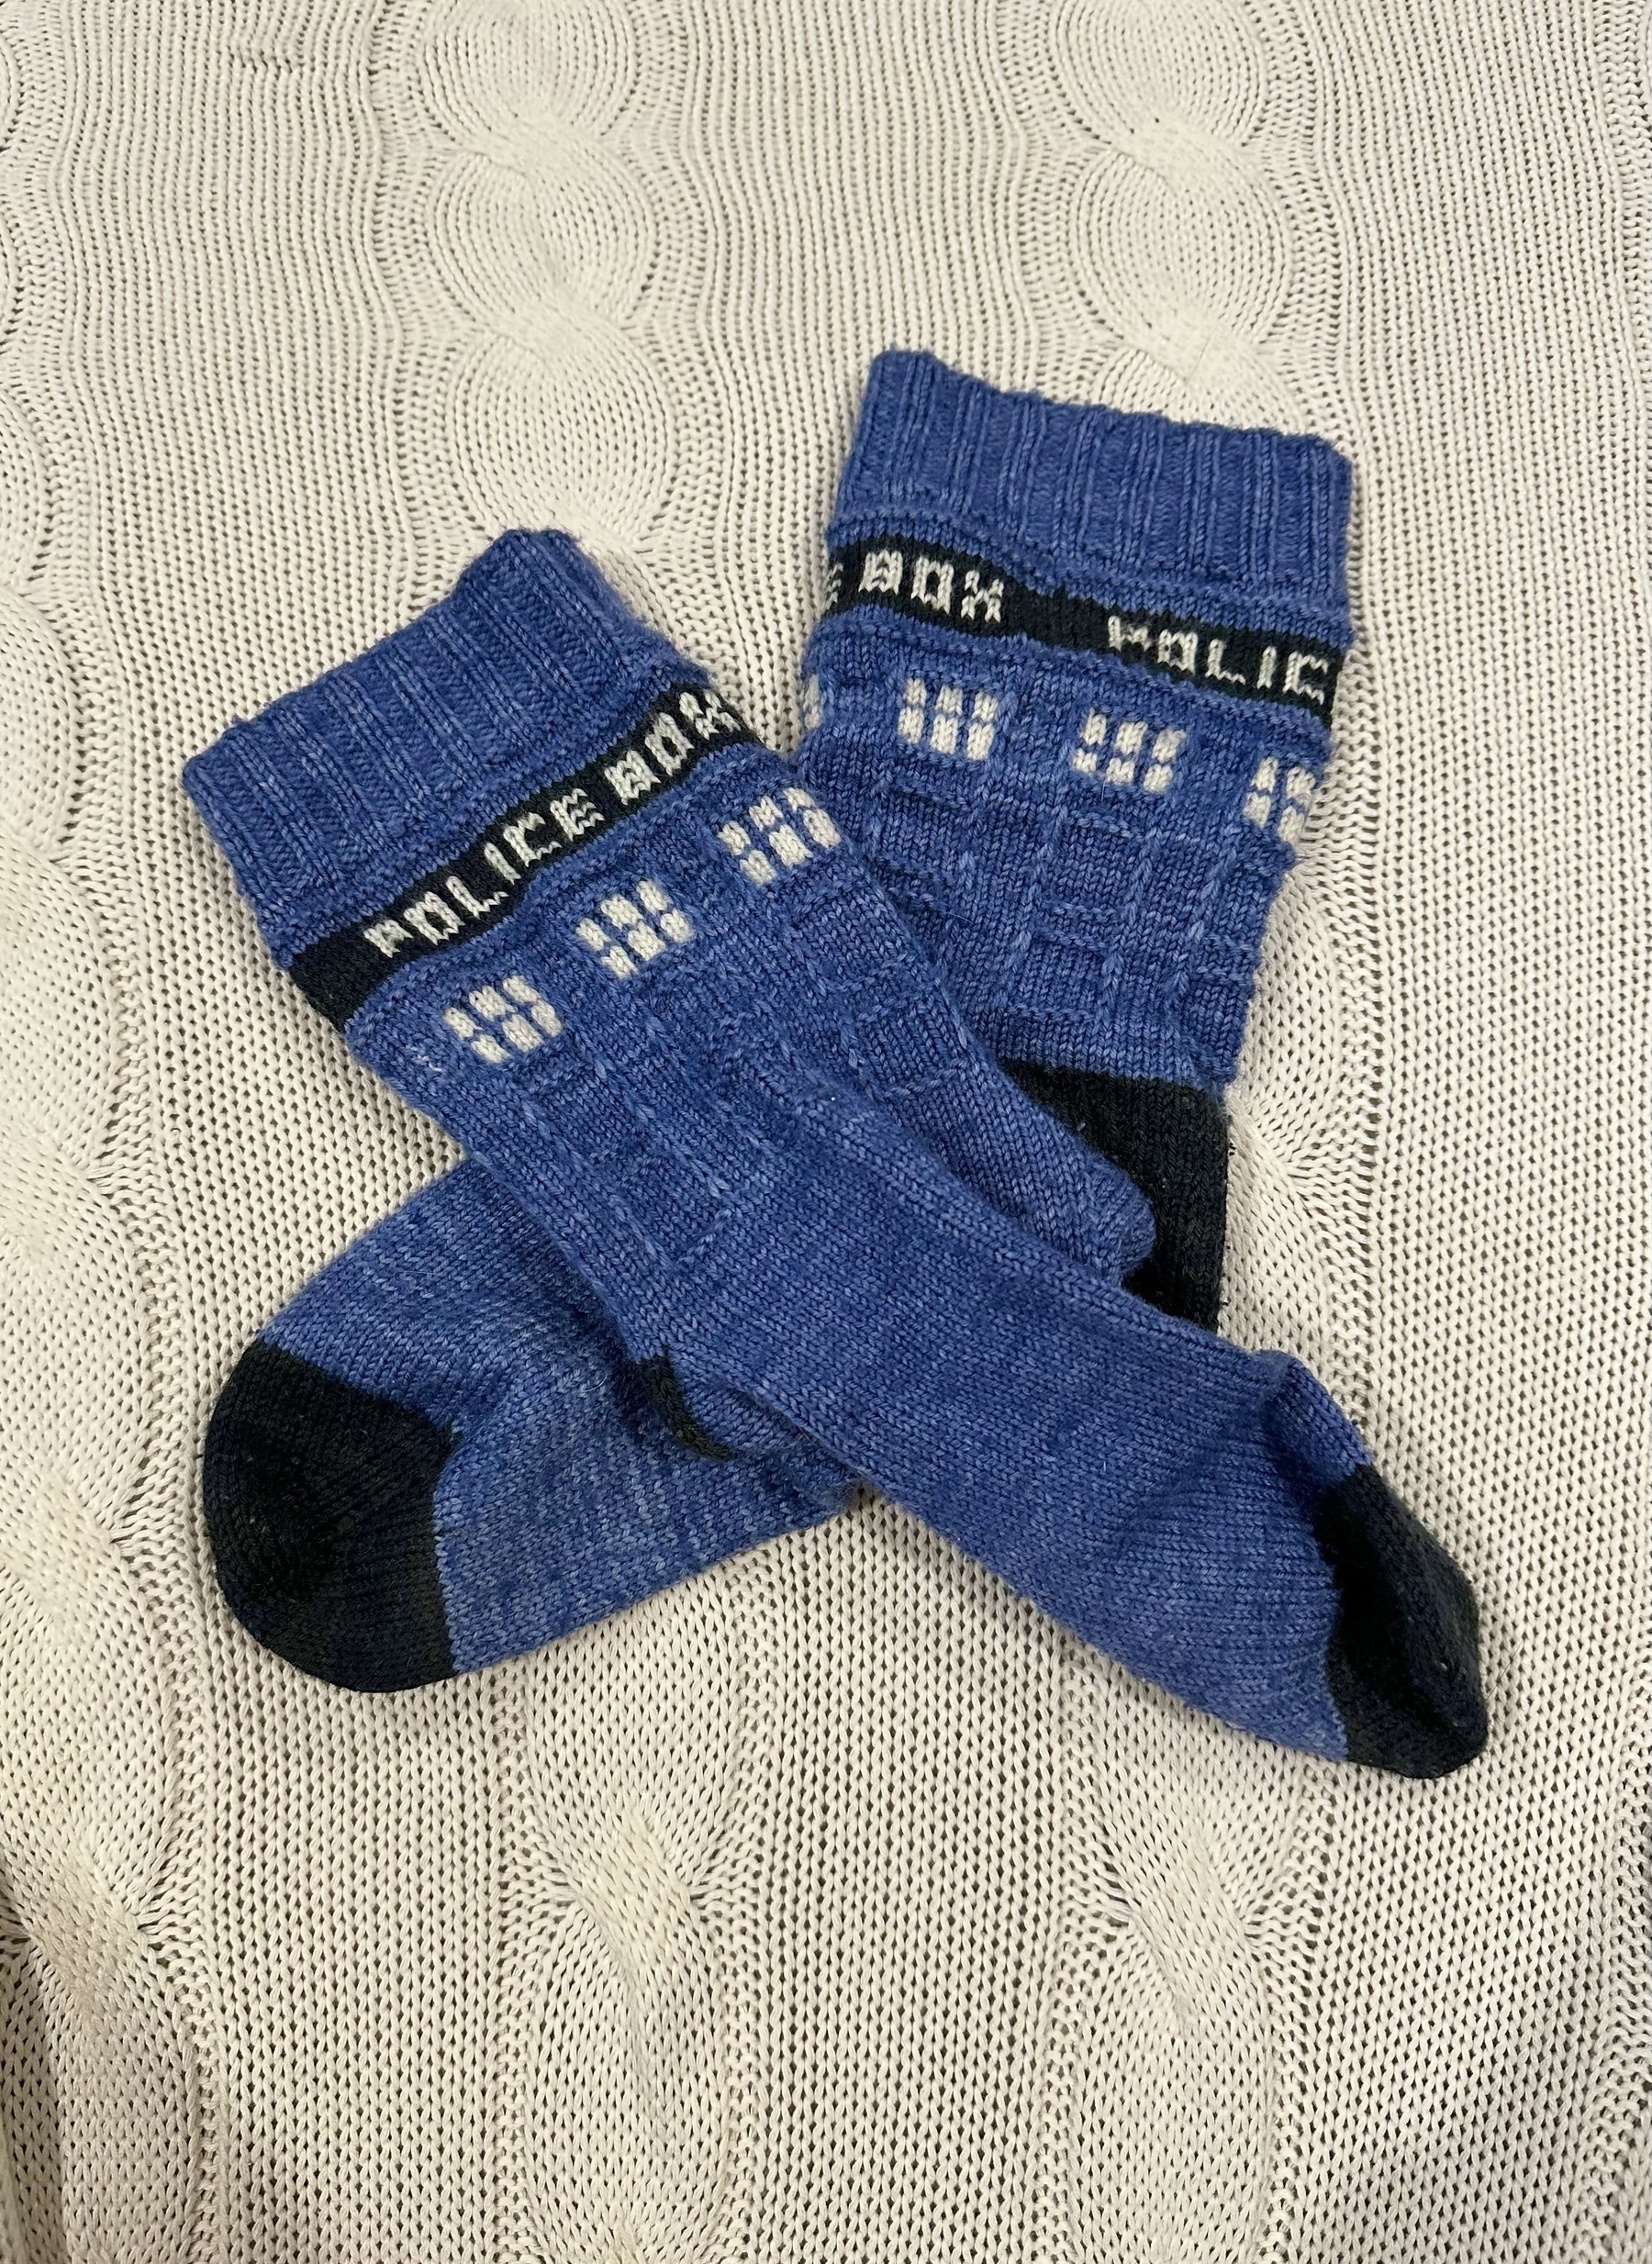 Blue socks knitted to resemble the TARDIS from Doctor Who. “Police Box” is in white lettering inside a black band near the top and white squares underneath are the windows.